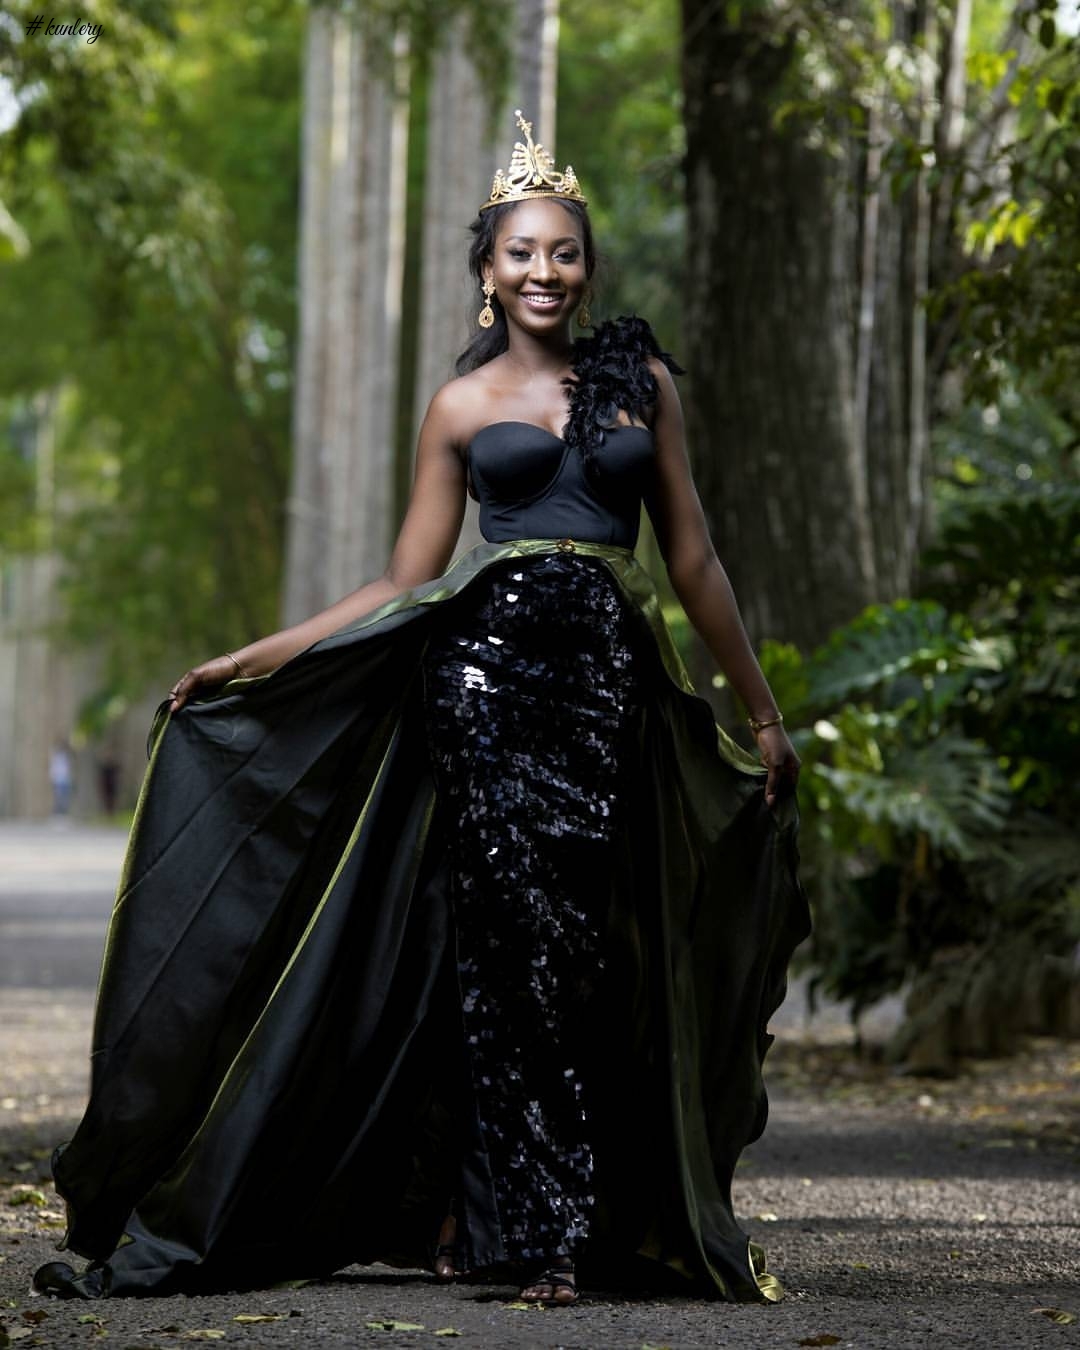 Miss Malaika Stuns In New Editorial In Elegant Sequined Dress As The Reigning Queen